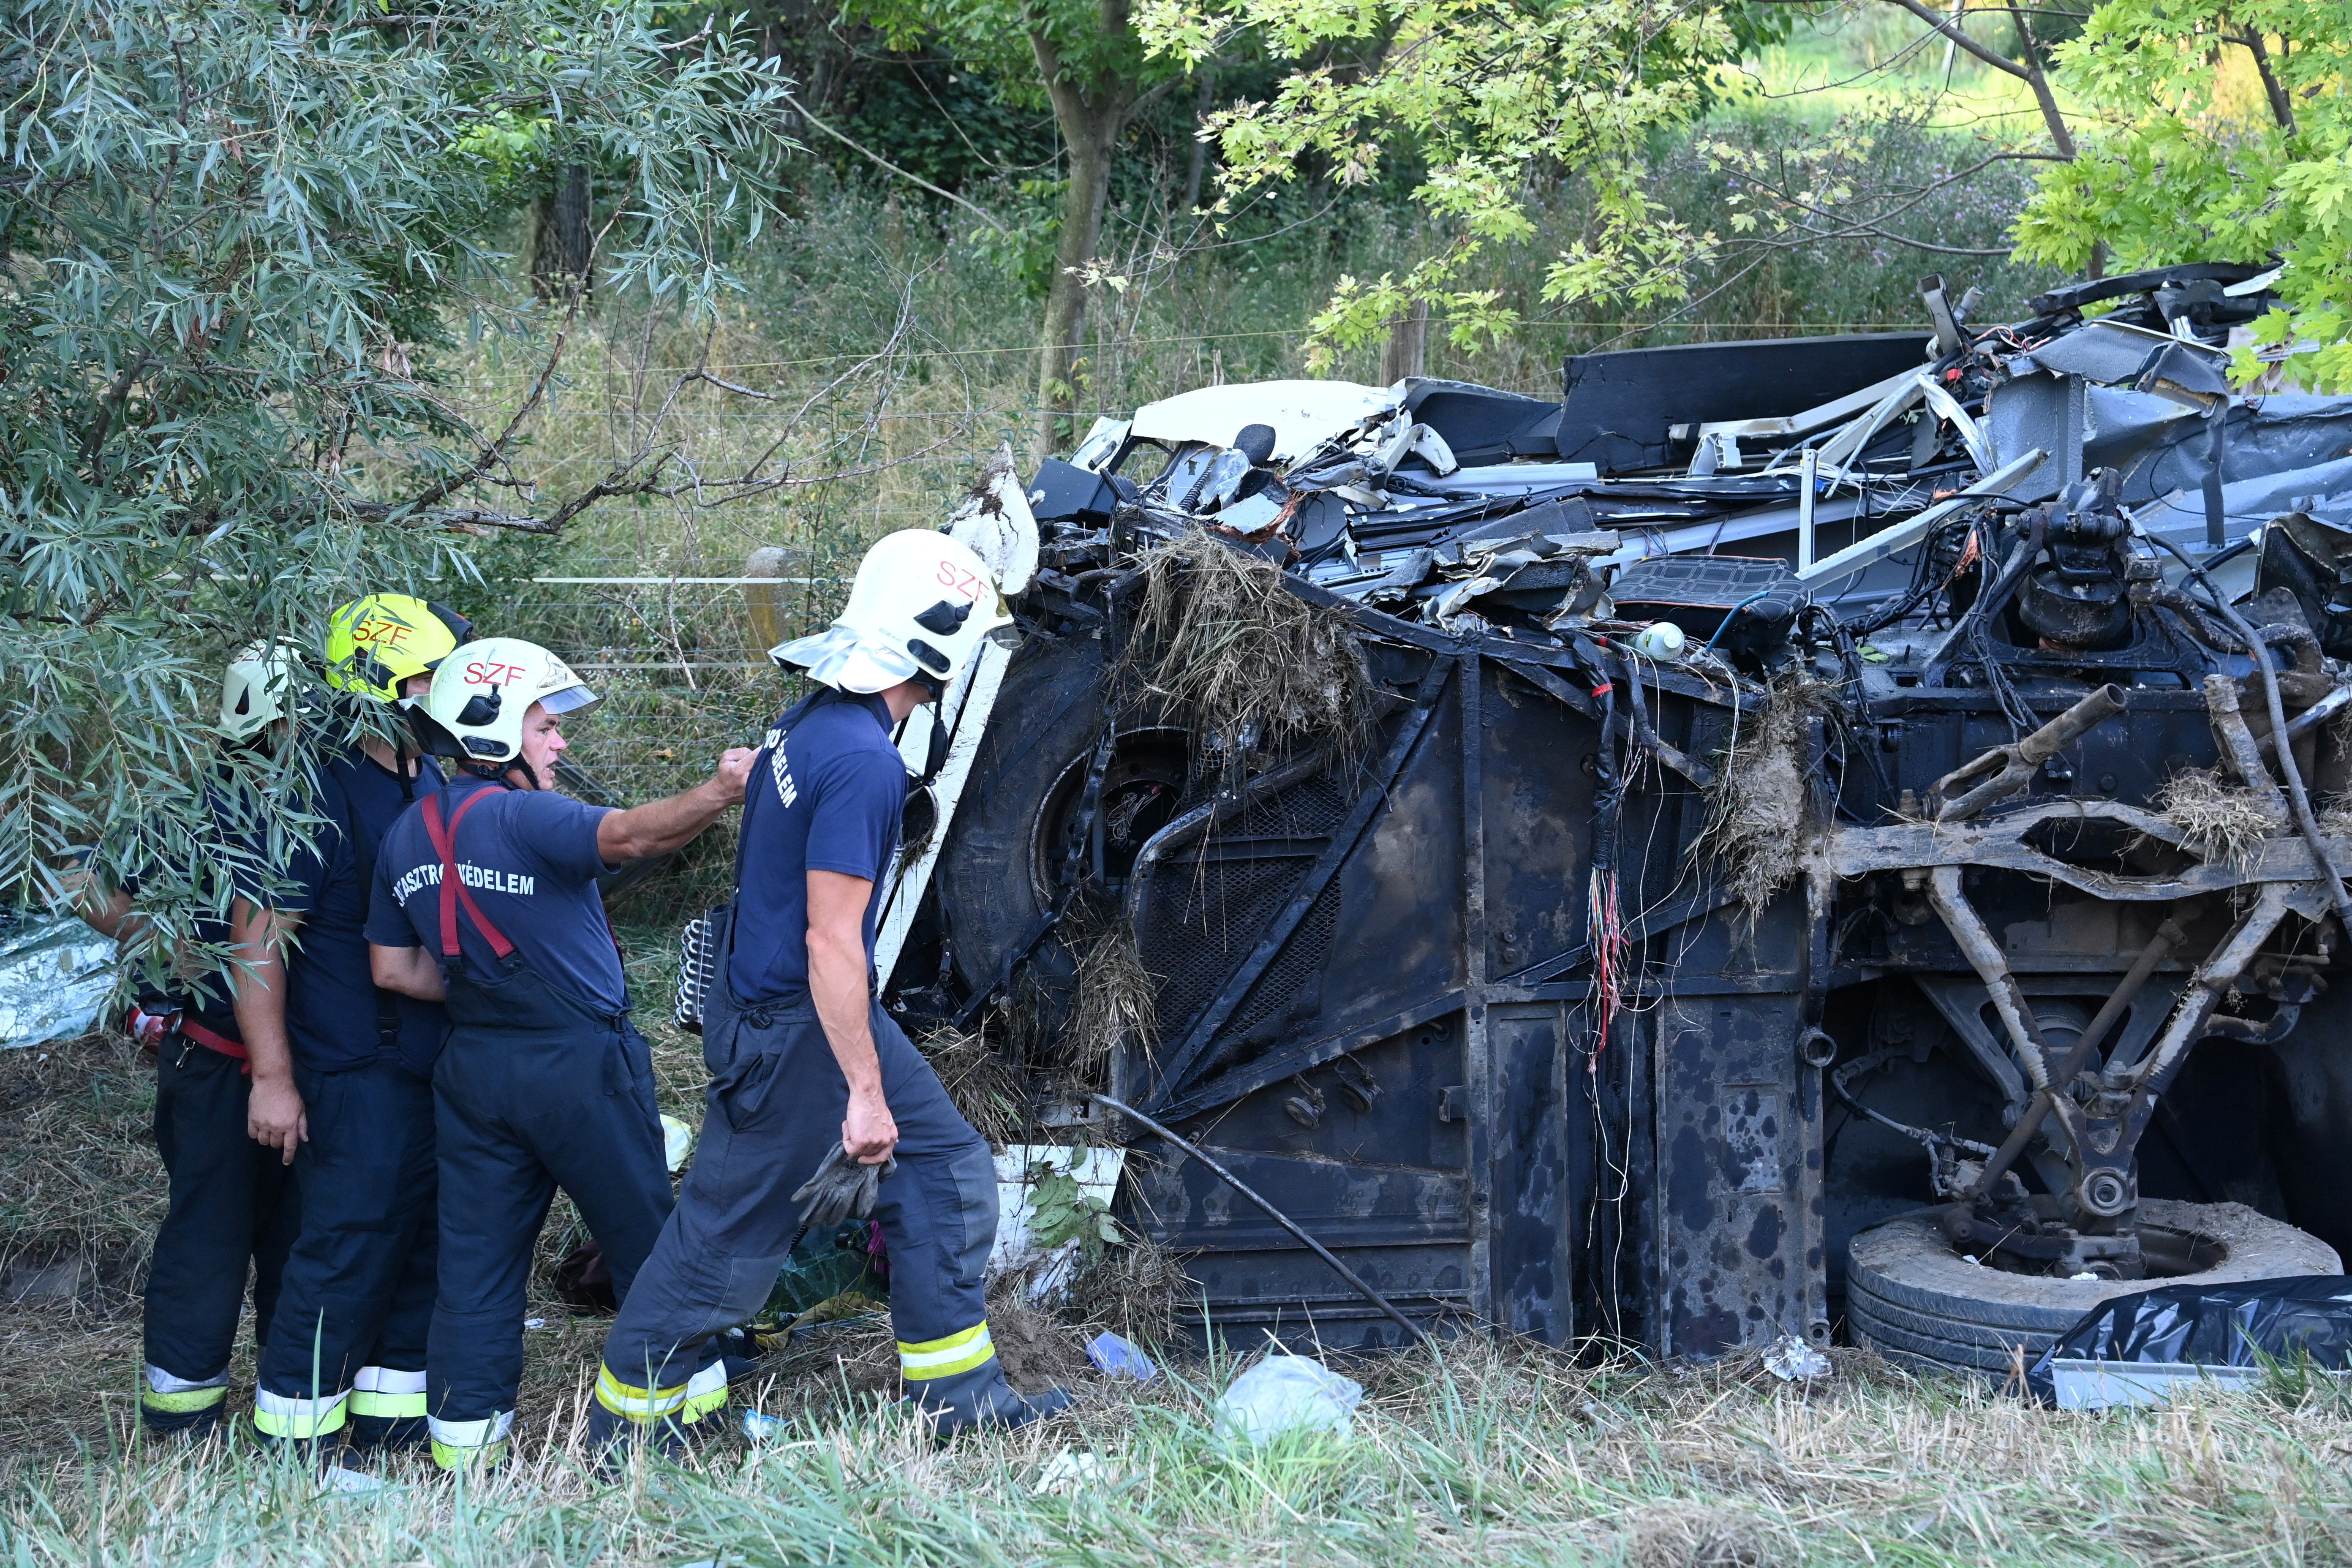 First responders work at the crash site, after a bus rolled over on the M7 motorway, killing at least eight people, in the early hours of Sunday near Szabadbattyan, Hungary August 15, 2021. Zoltan Mihadak/Pool via REUTERS